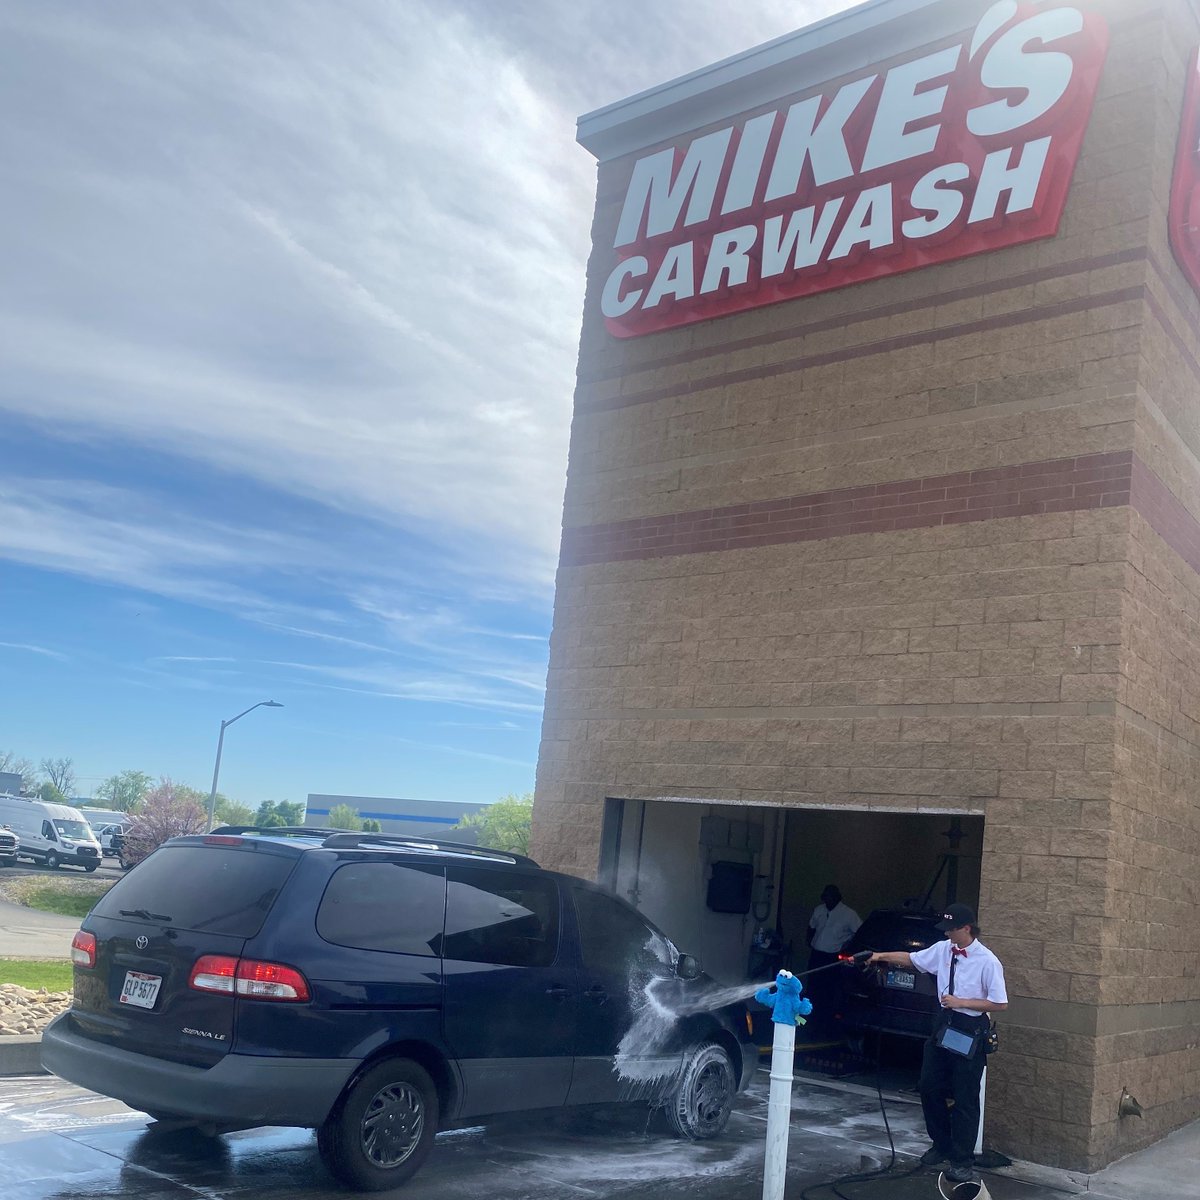 ☀️🚗 What's better than enjoying a sunny day? Cruising around in a squeaky-clean ride! 🚿✨ Swing by our carwash and let's make your day shine even brighter!